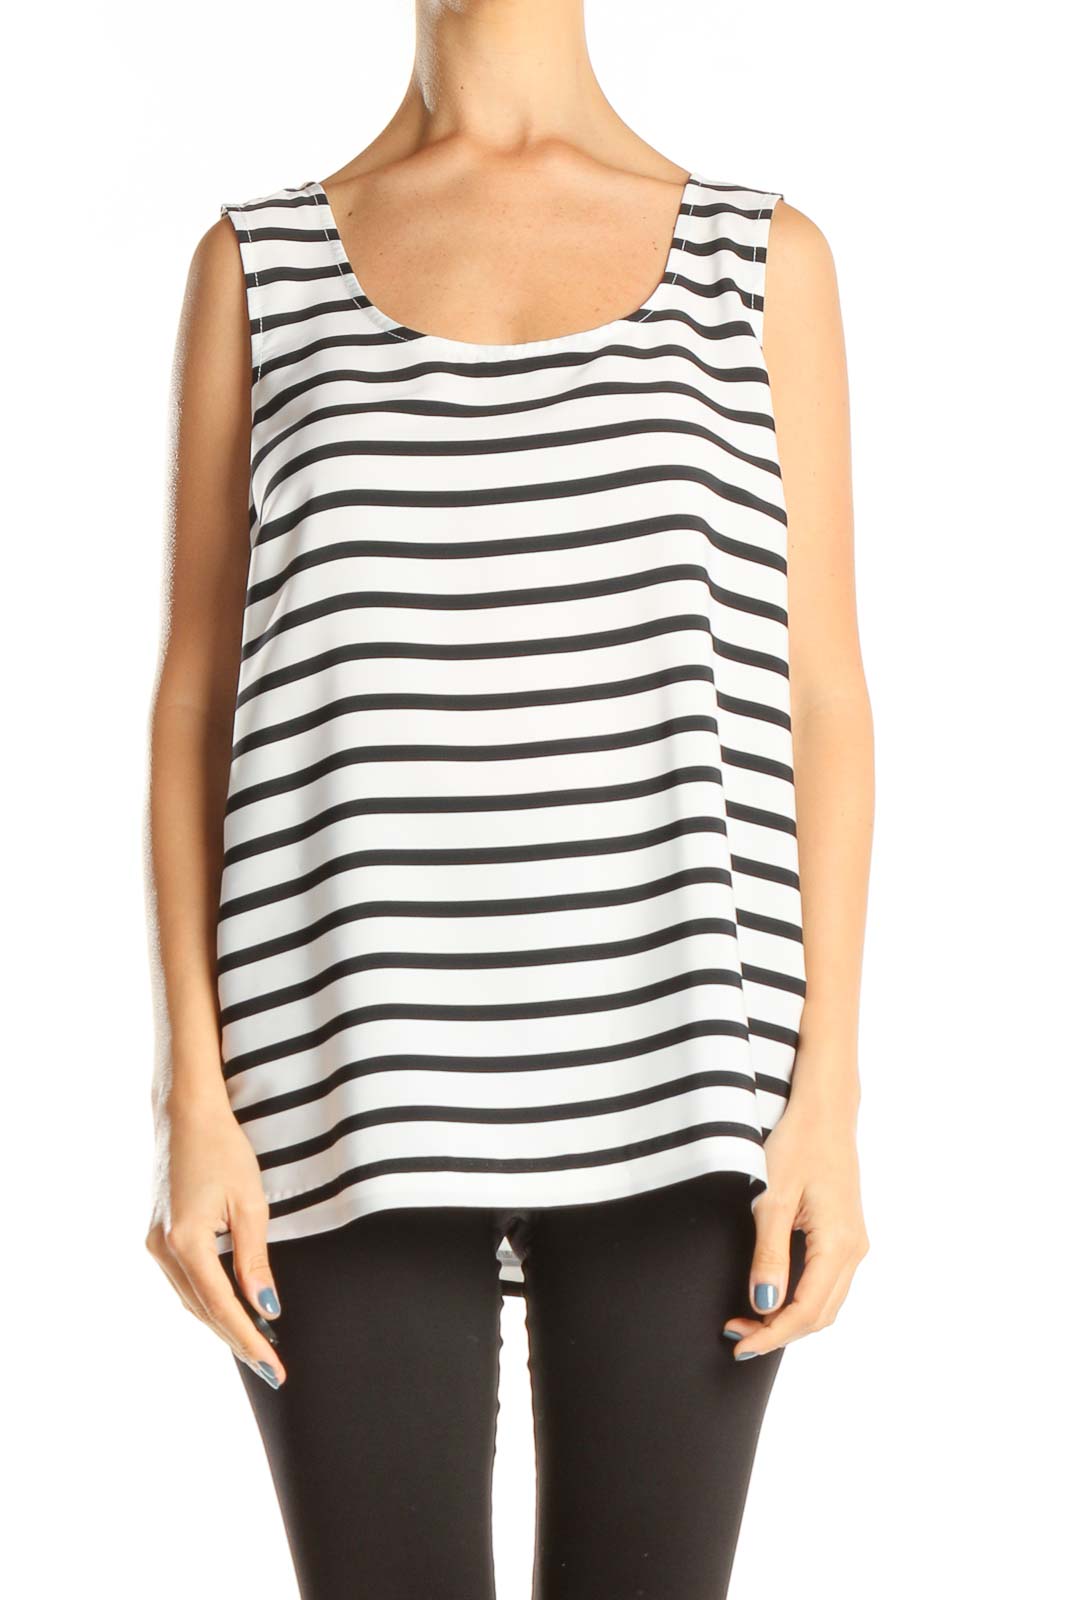 White Striped Casual Top Front